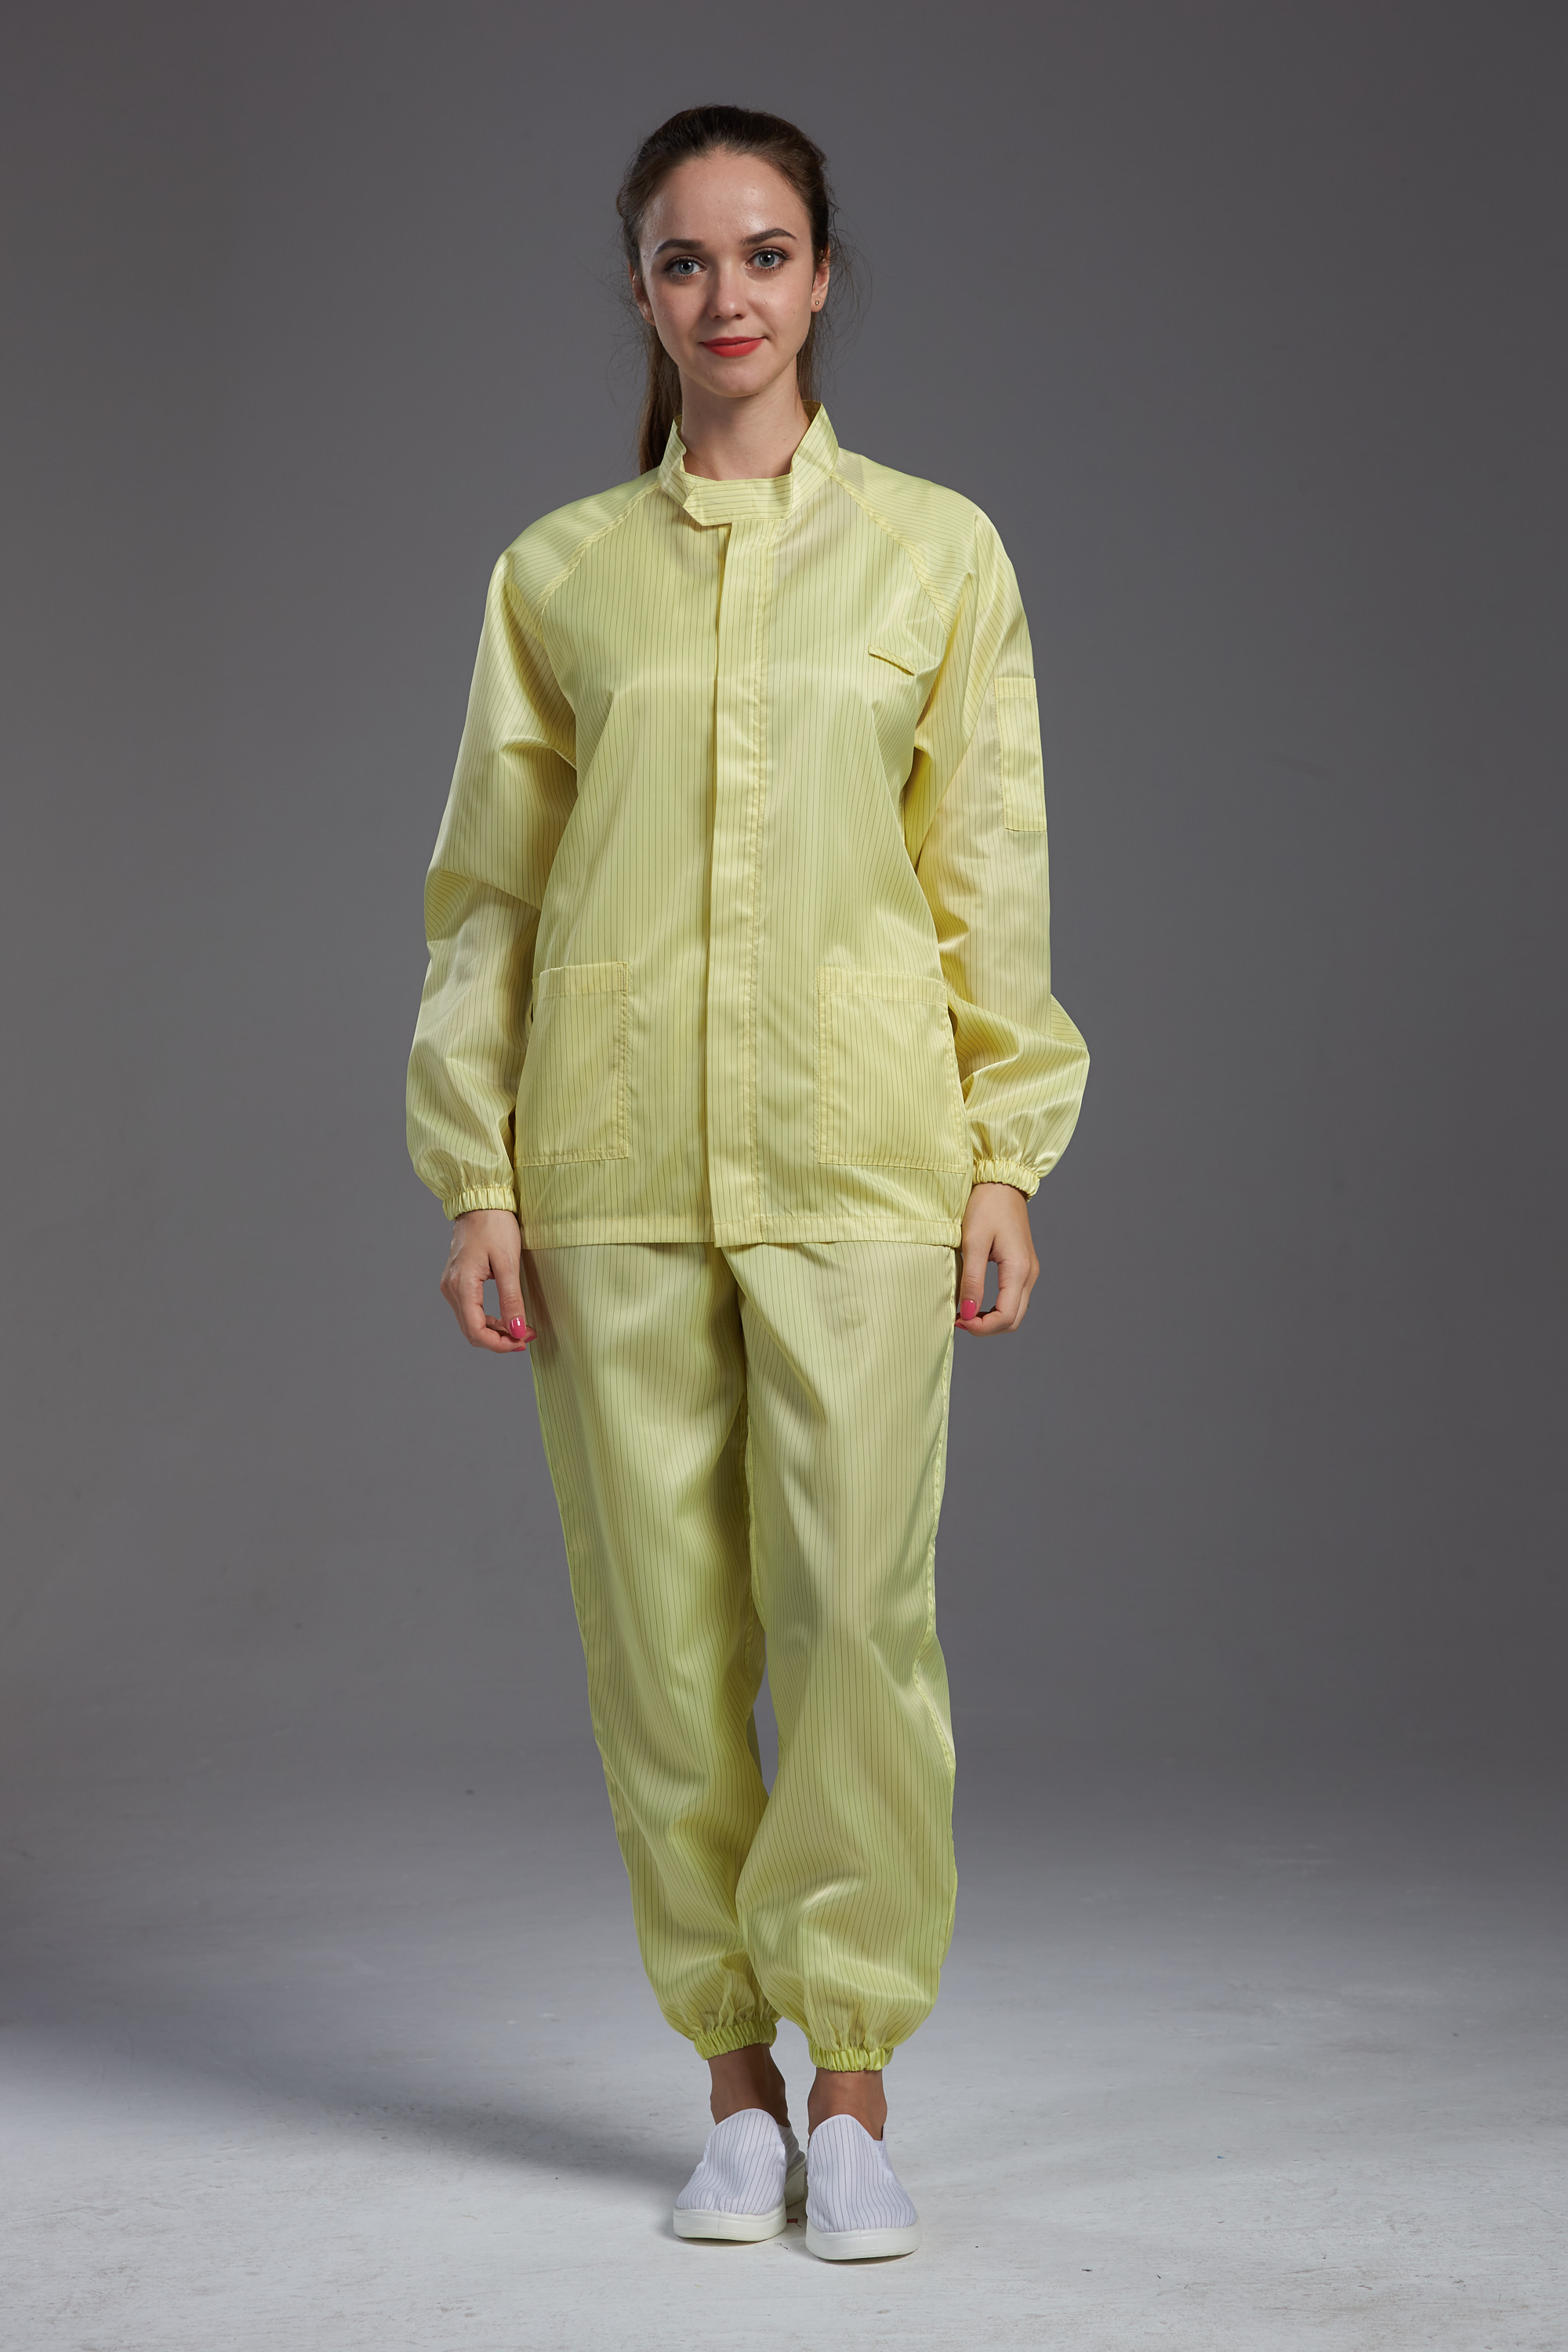 Best Yellow Unisex Clean Room Garments Anti Static With Straight Open Buttons wholesale